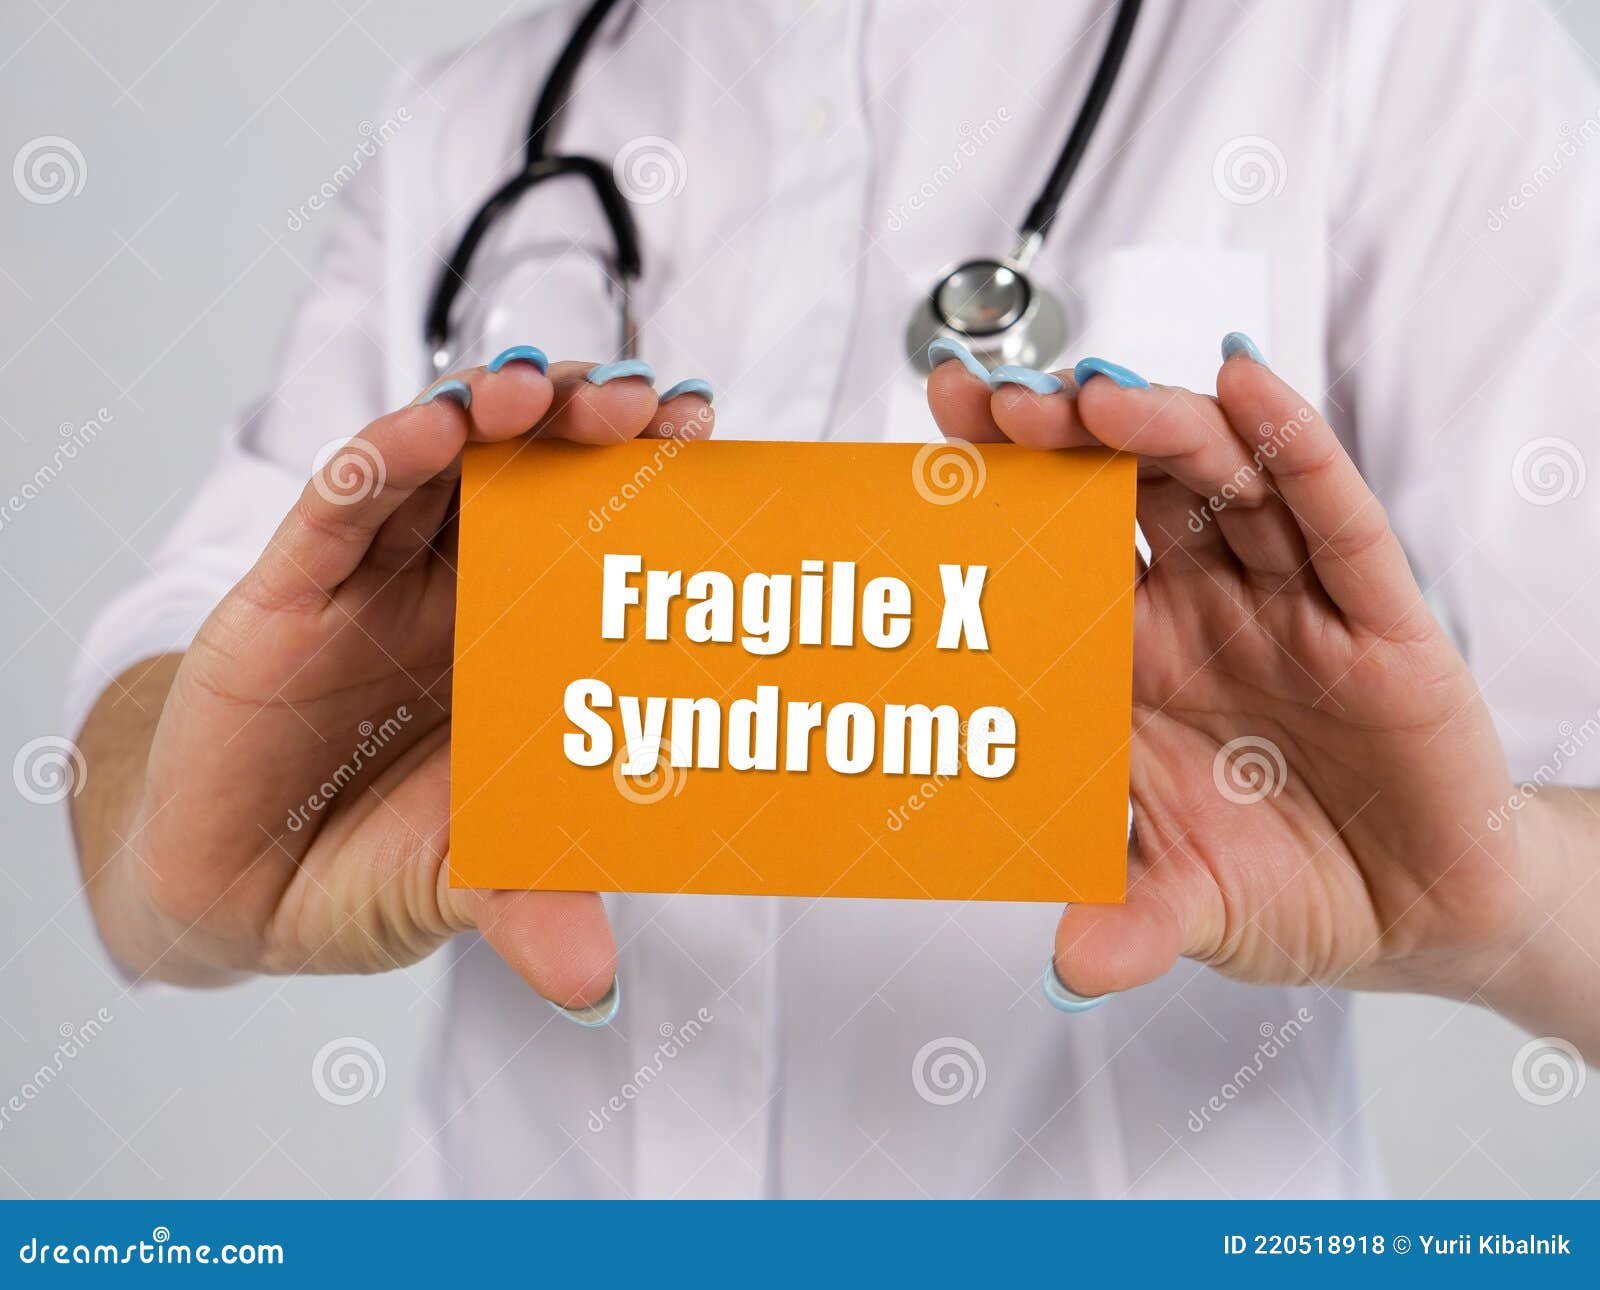 healthcare concept meaning fragile x syndrome with inscription on the piece of paper